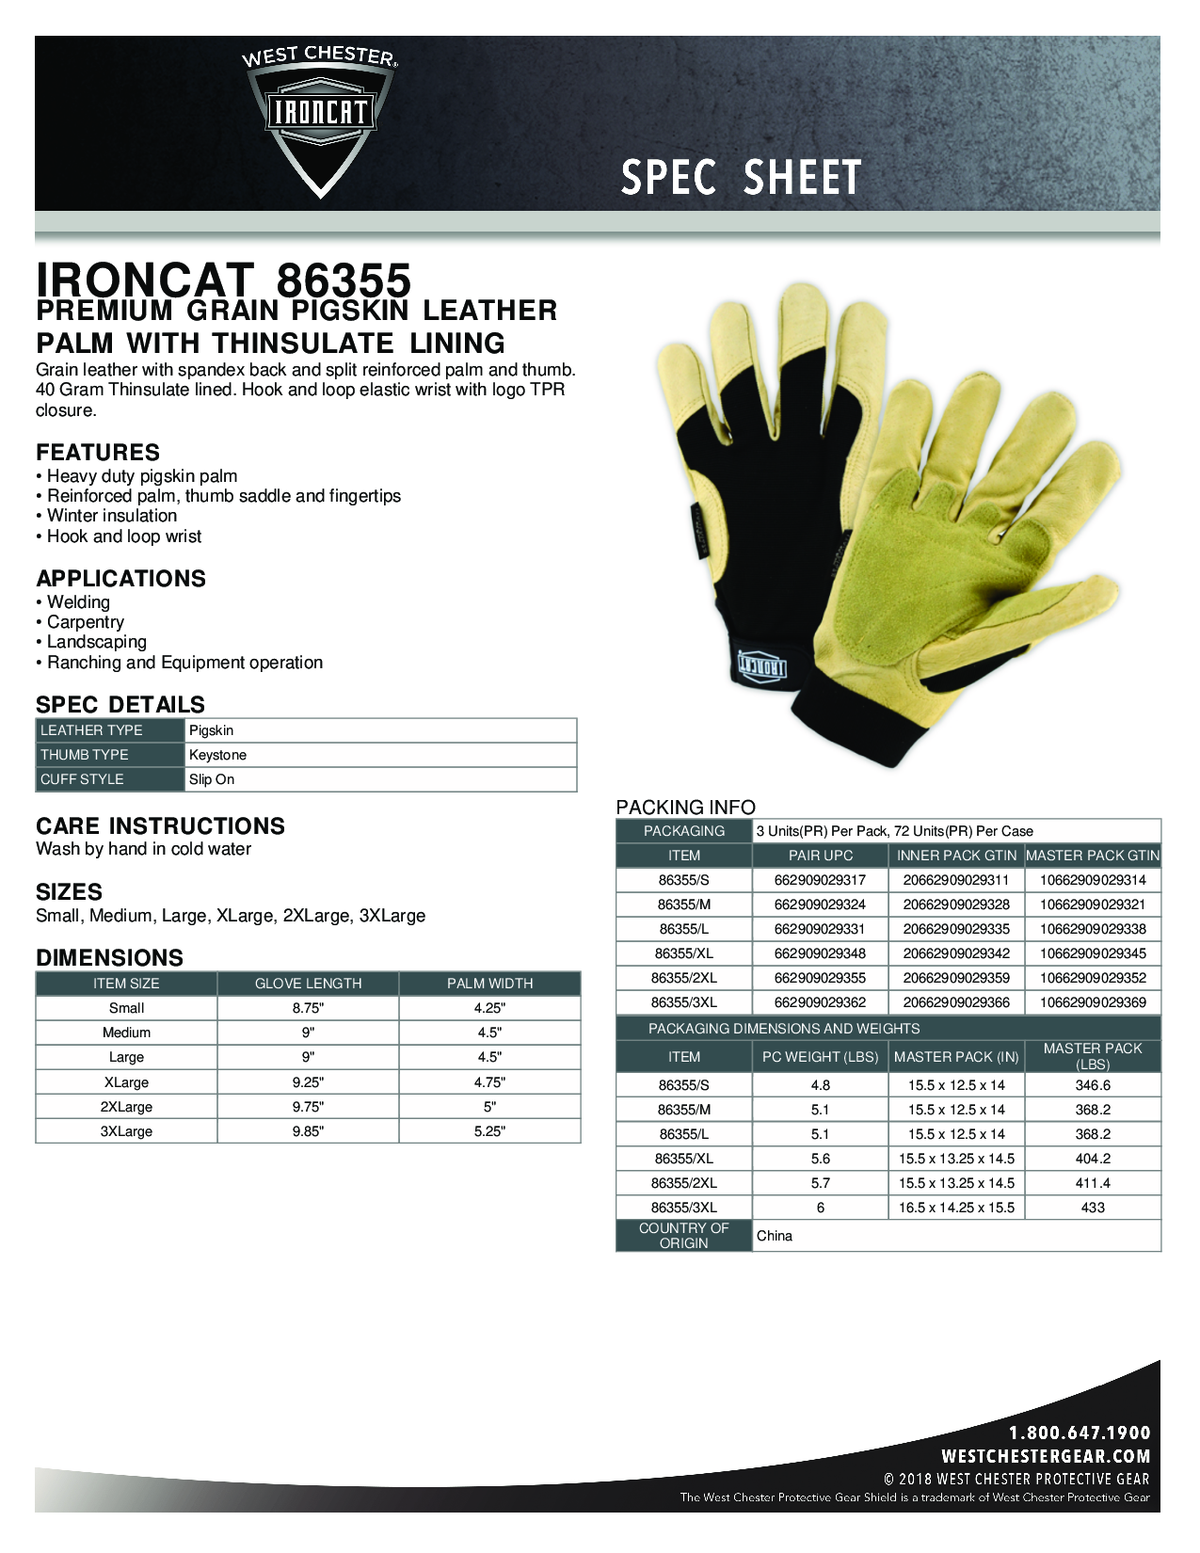 Heavy Duty Insulated Gloves with Pigskin Palm 1PAIR